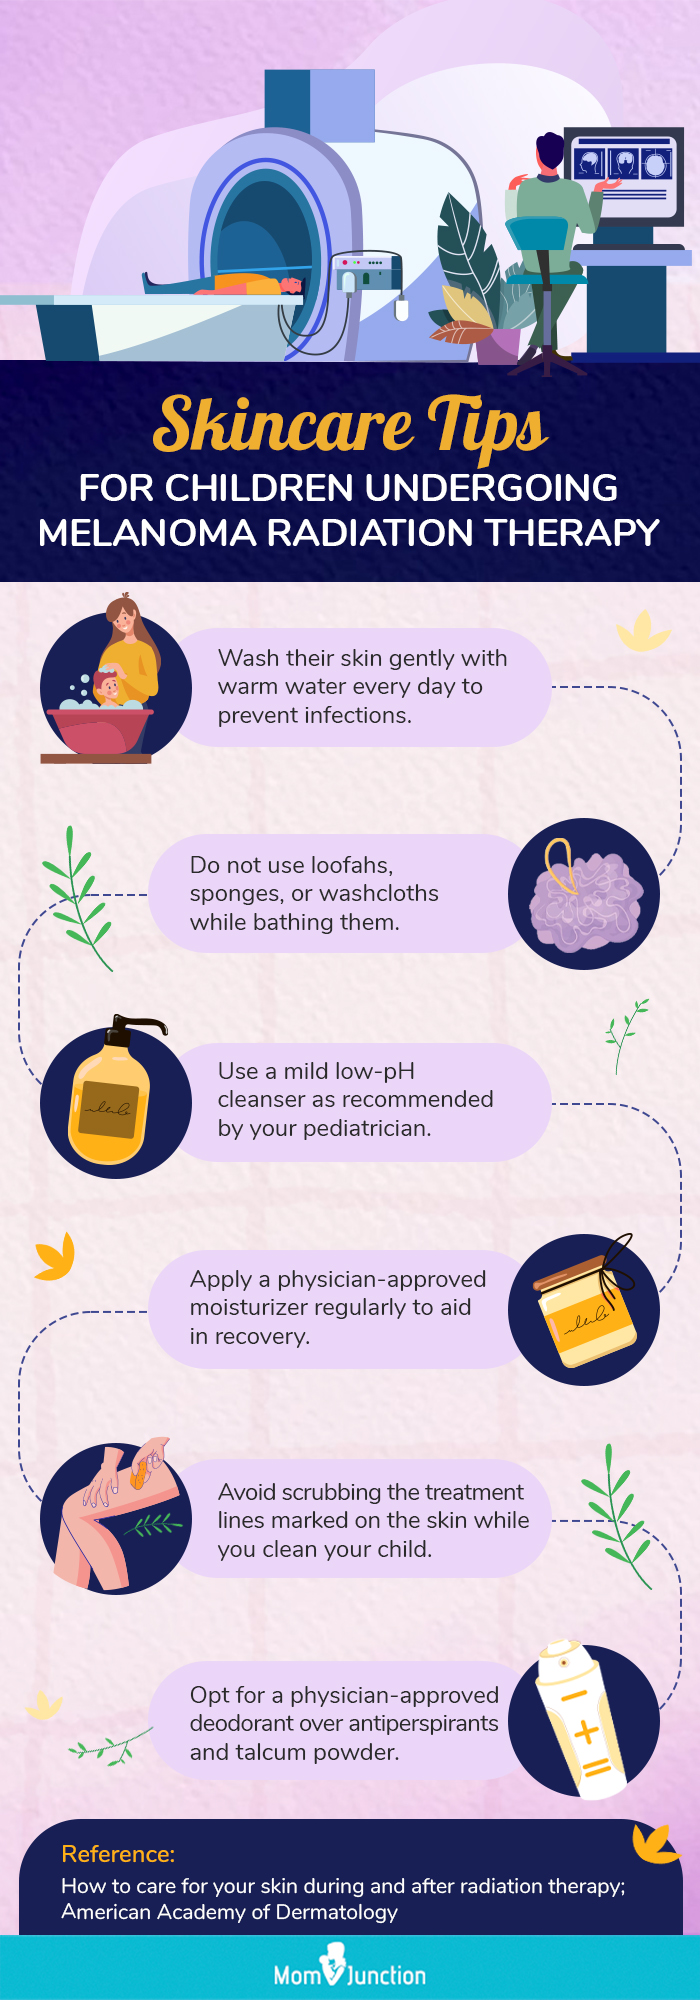 skincare tips for children undergoing melanoma radiation therapy (infographic)